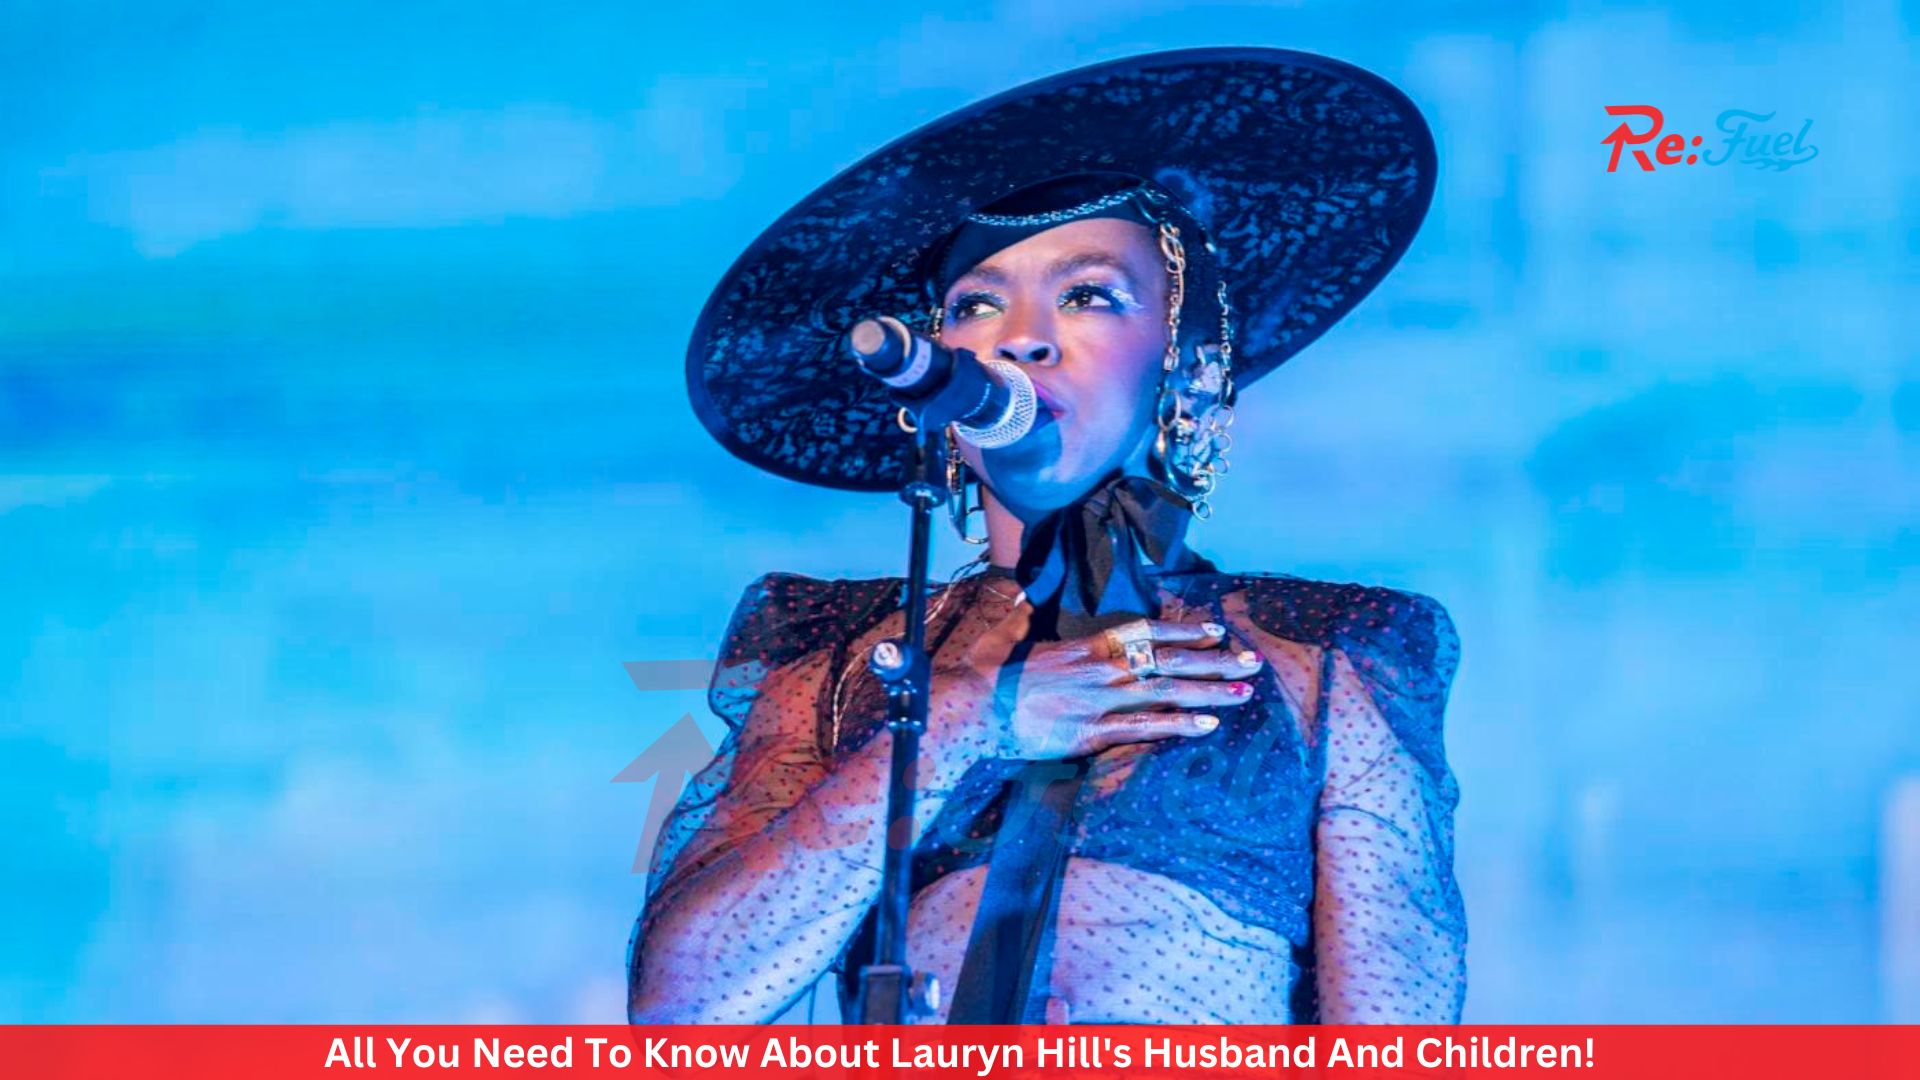 All You Need To Know About Lauryn Hill's Husband And Children!